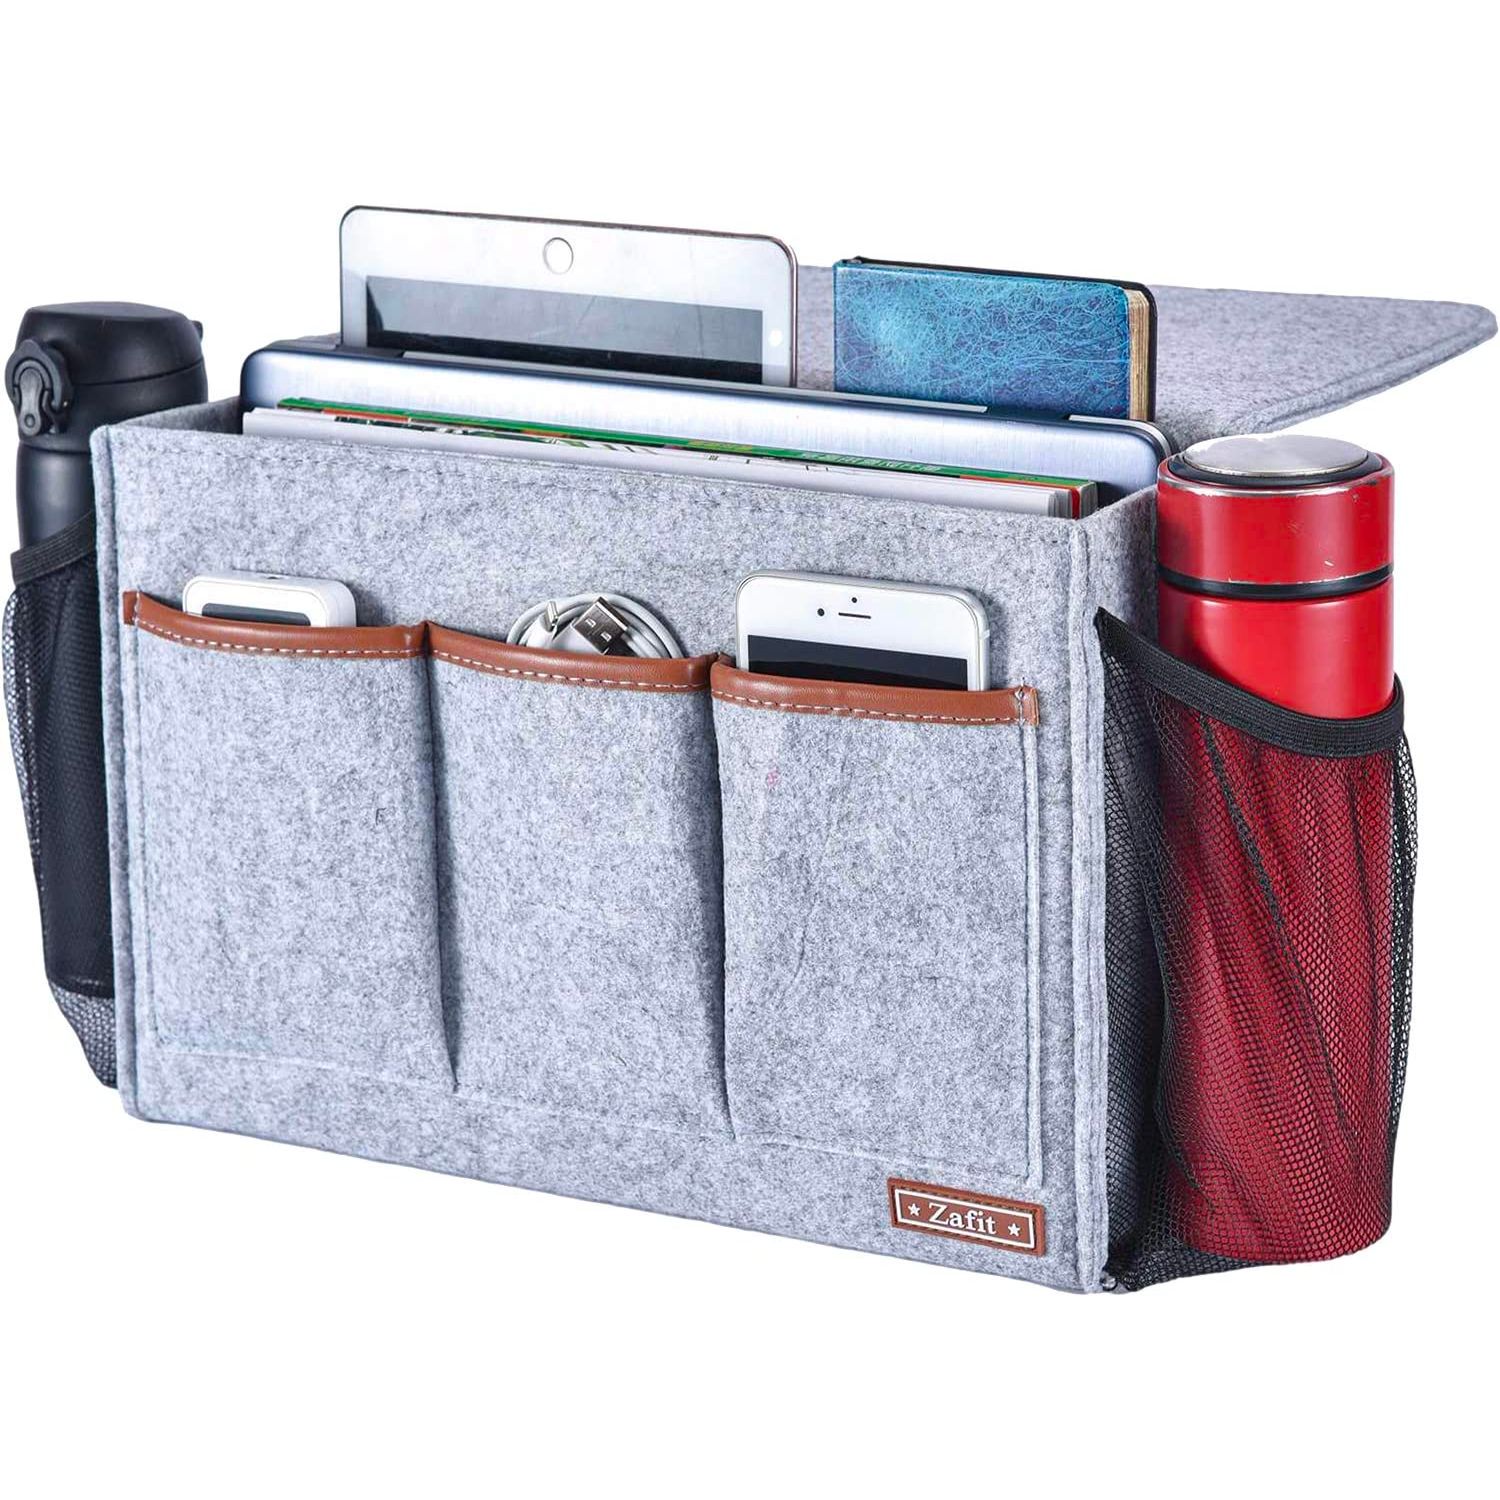 The Best Gifts for College Students: Bedside Caddy